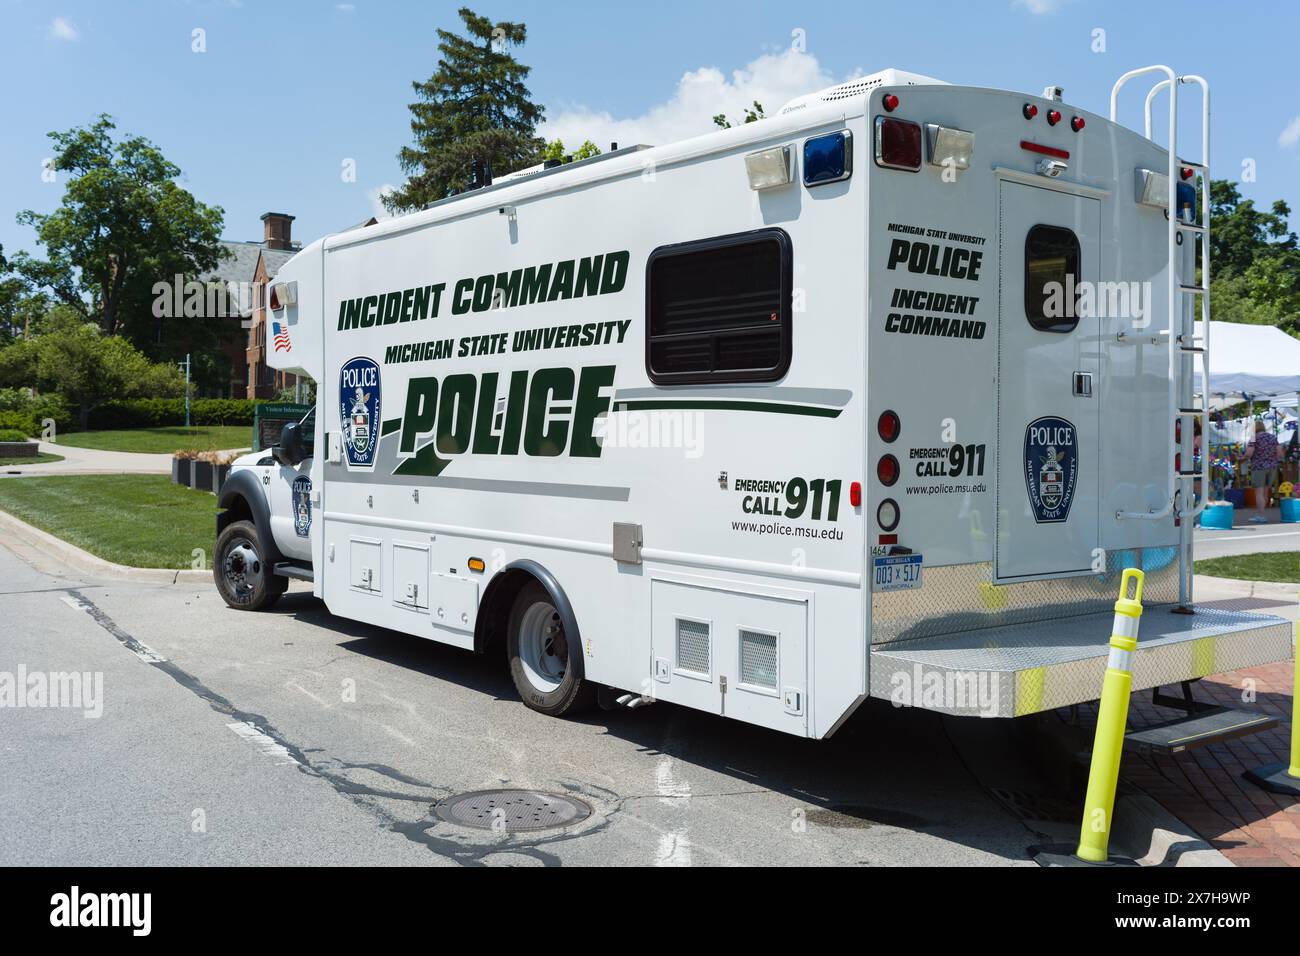 Incident Command Michigan State University campus police vehicle Stock Photo